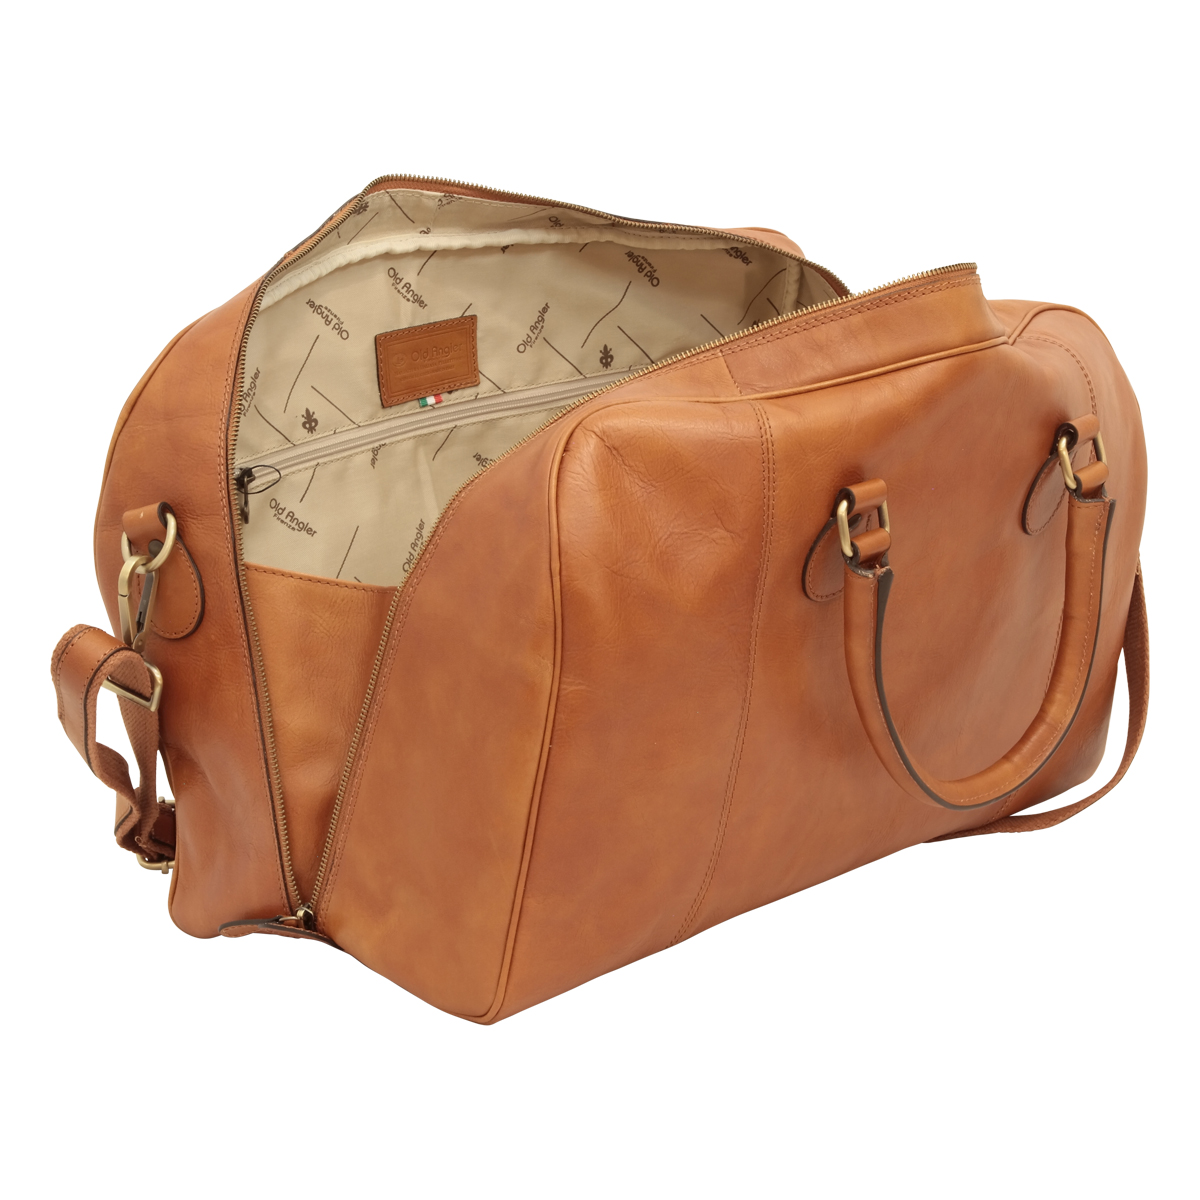 Leather Duffel Bag - Colonial | 404289CO US | Old Angler Firenze